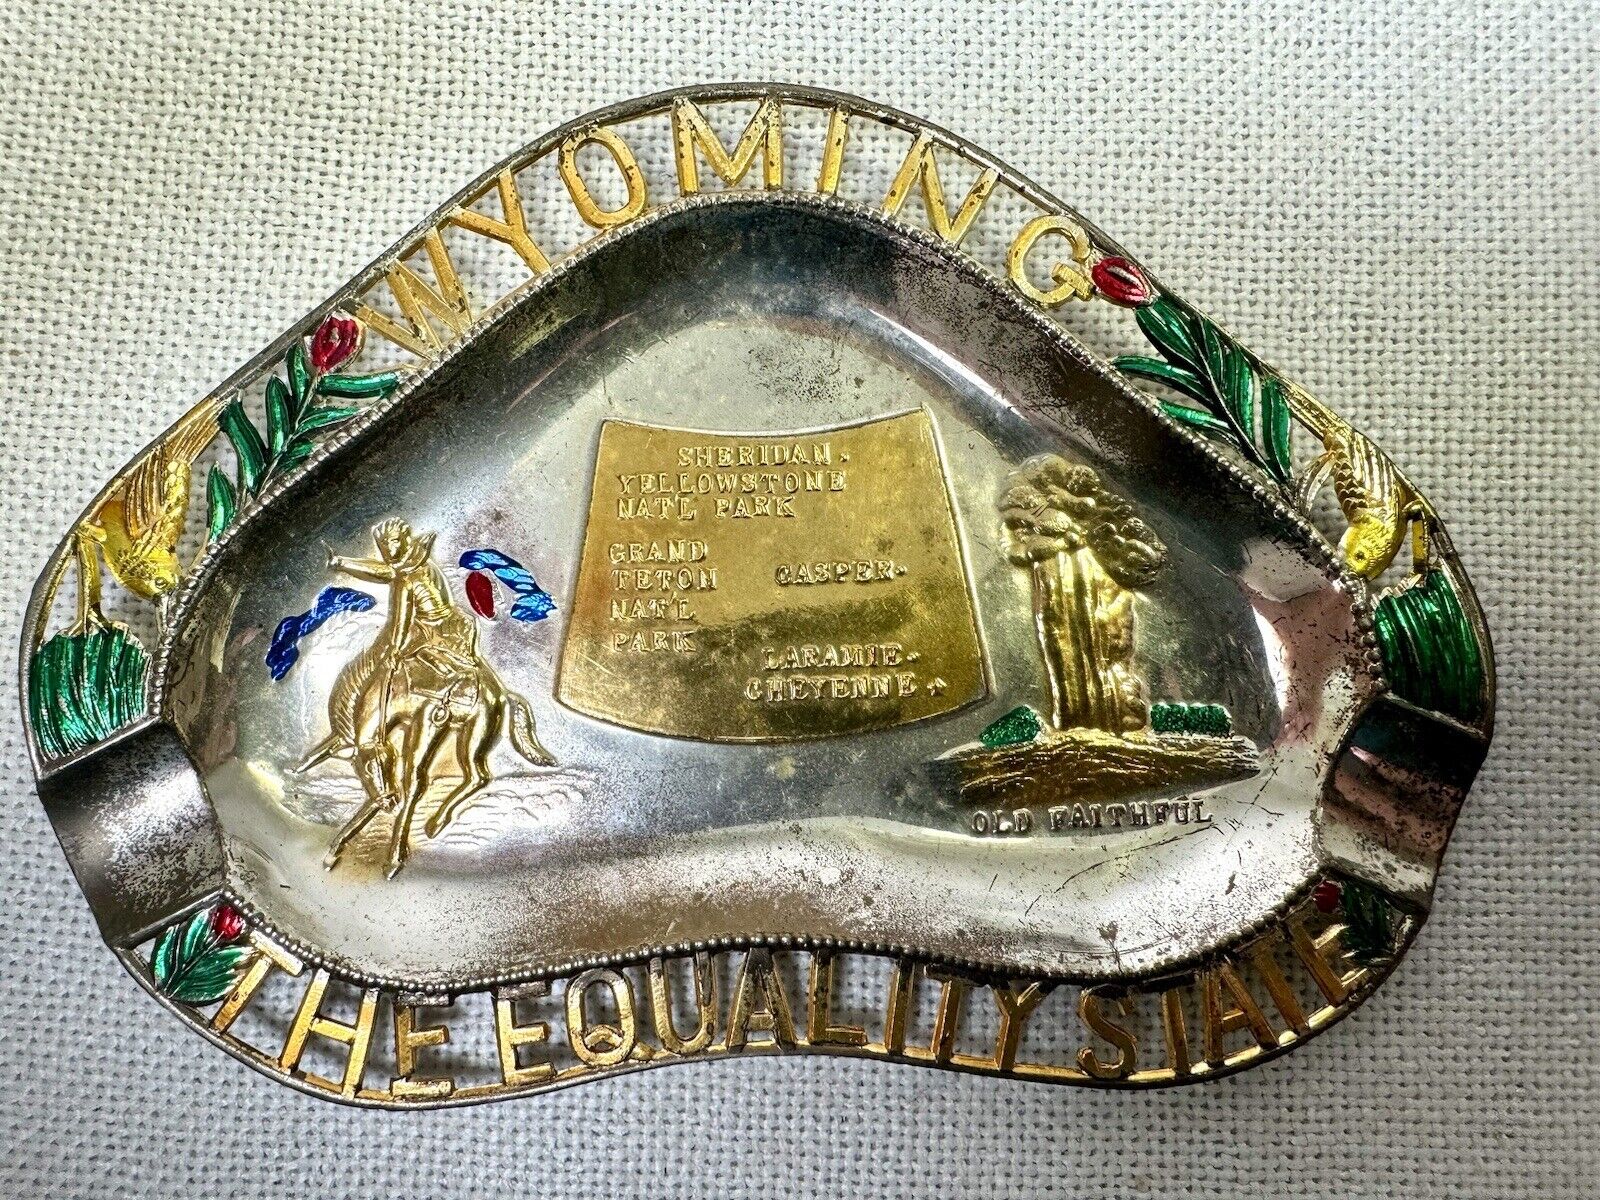 Vintage Souvenir Ashtray - Wyoming / The Equality State - 1960's Made In Japan